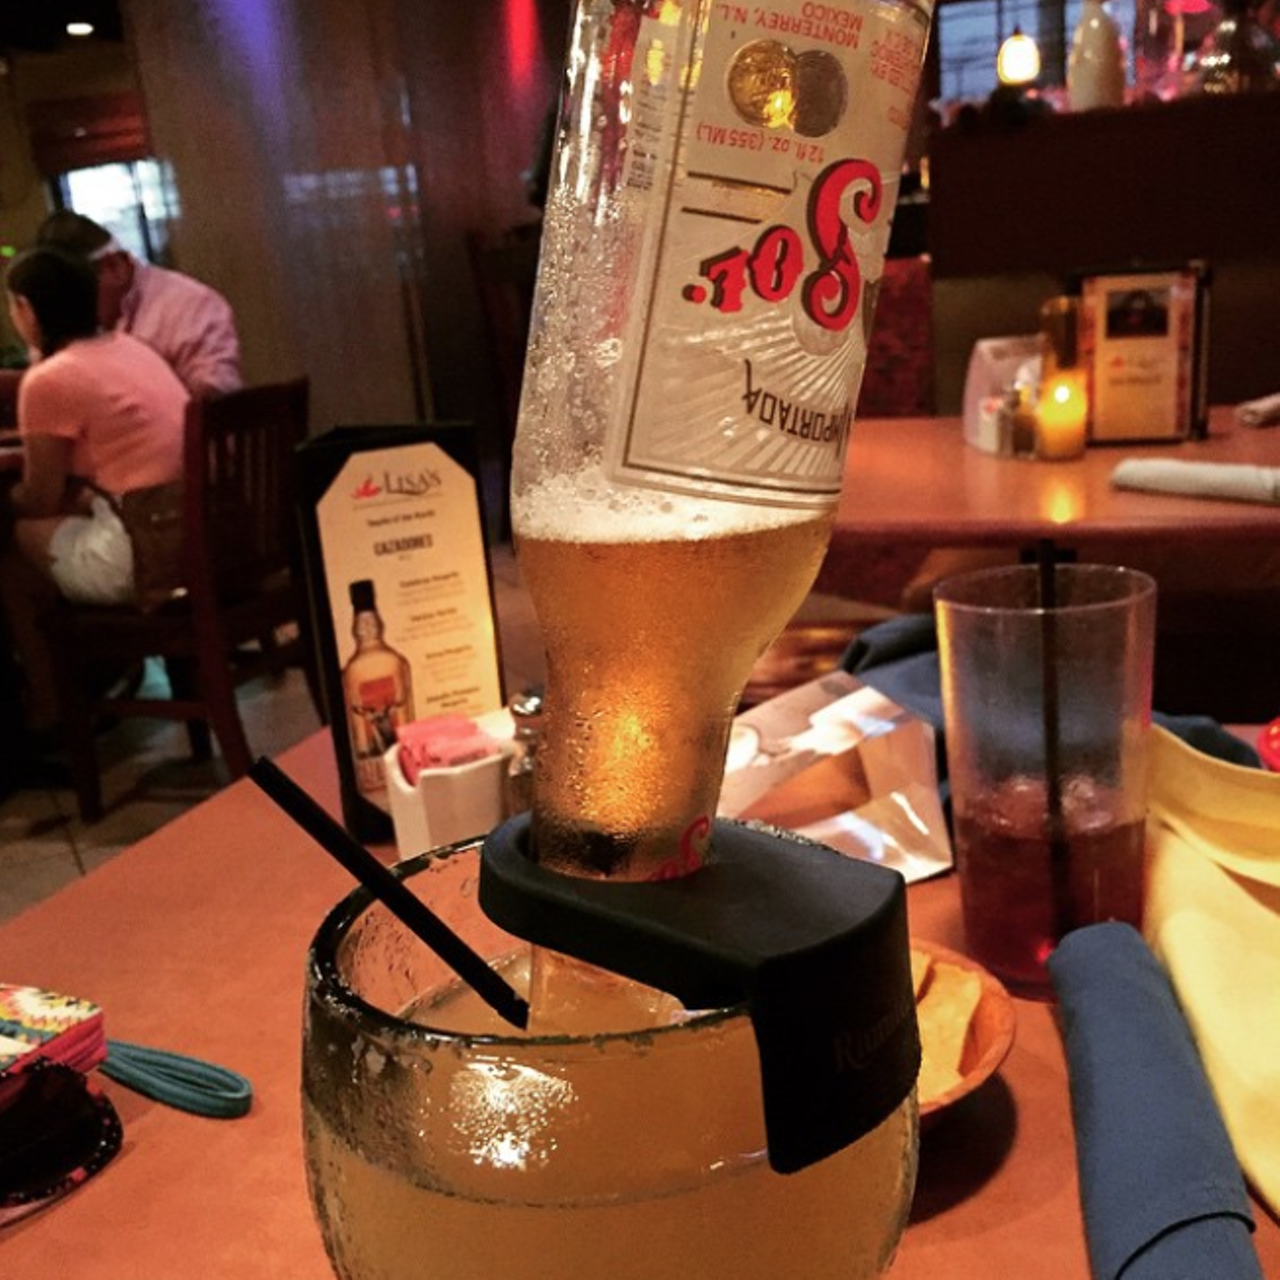 Lisa’s Mexican Restaurant
815 Bandera Road, (210) 433-2531, lisasmexican.com
A St. Mary’s happy hour spot for the past 37 years, Lisa’s is a must for cold margaritas and $5 botana (appetizers) at Bar Mosaico.
Photo via Instagram / liztxchild